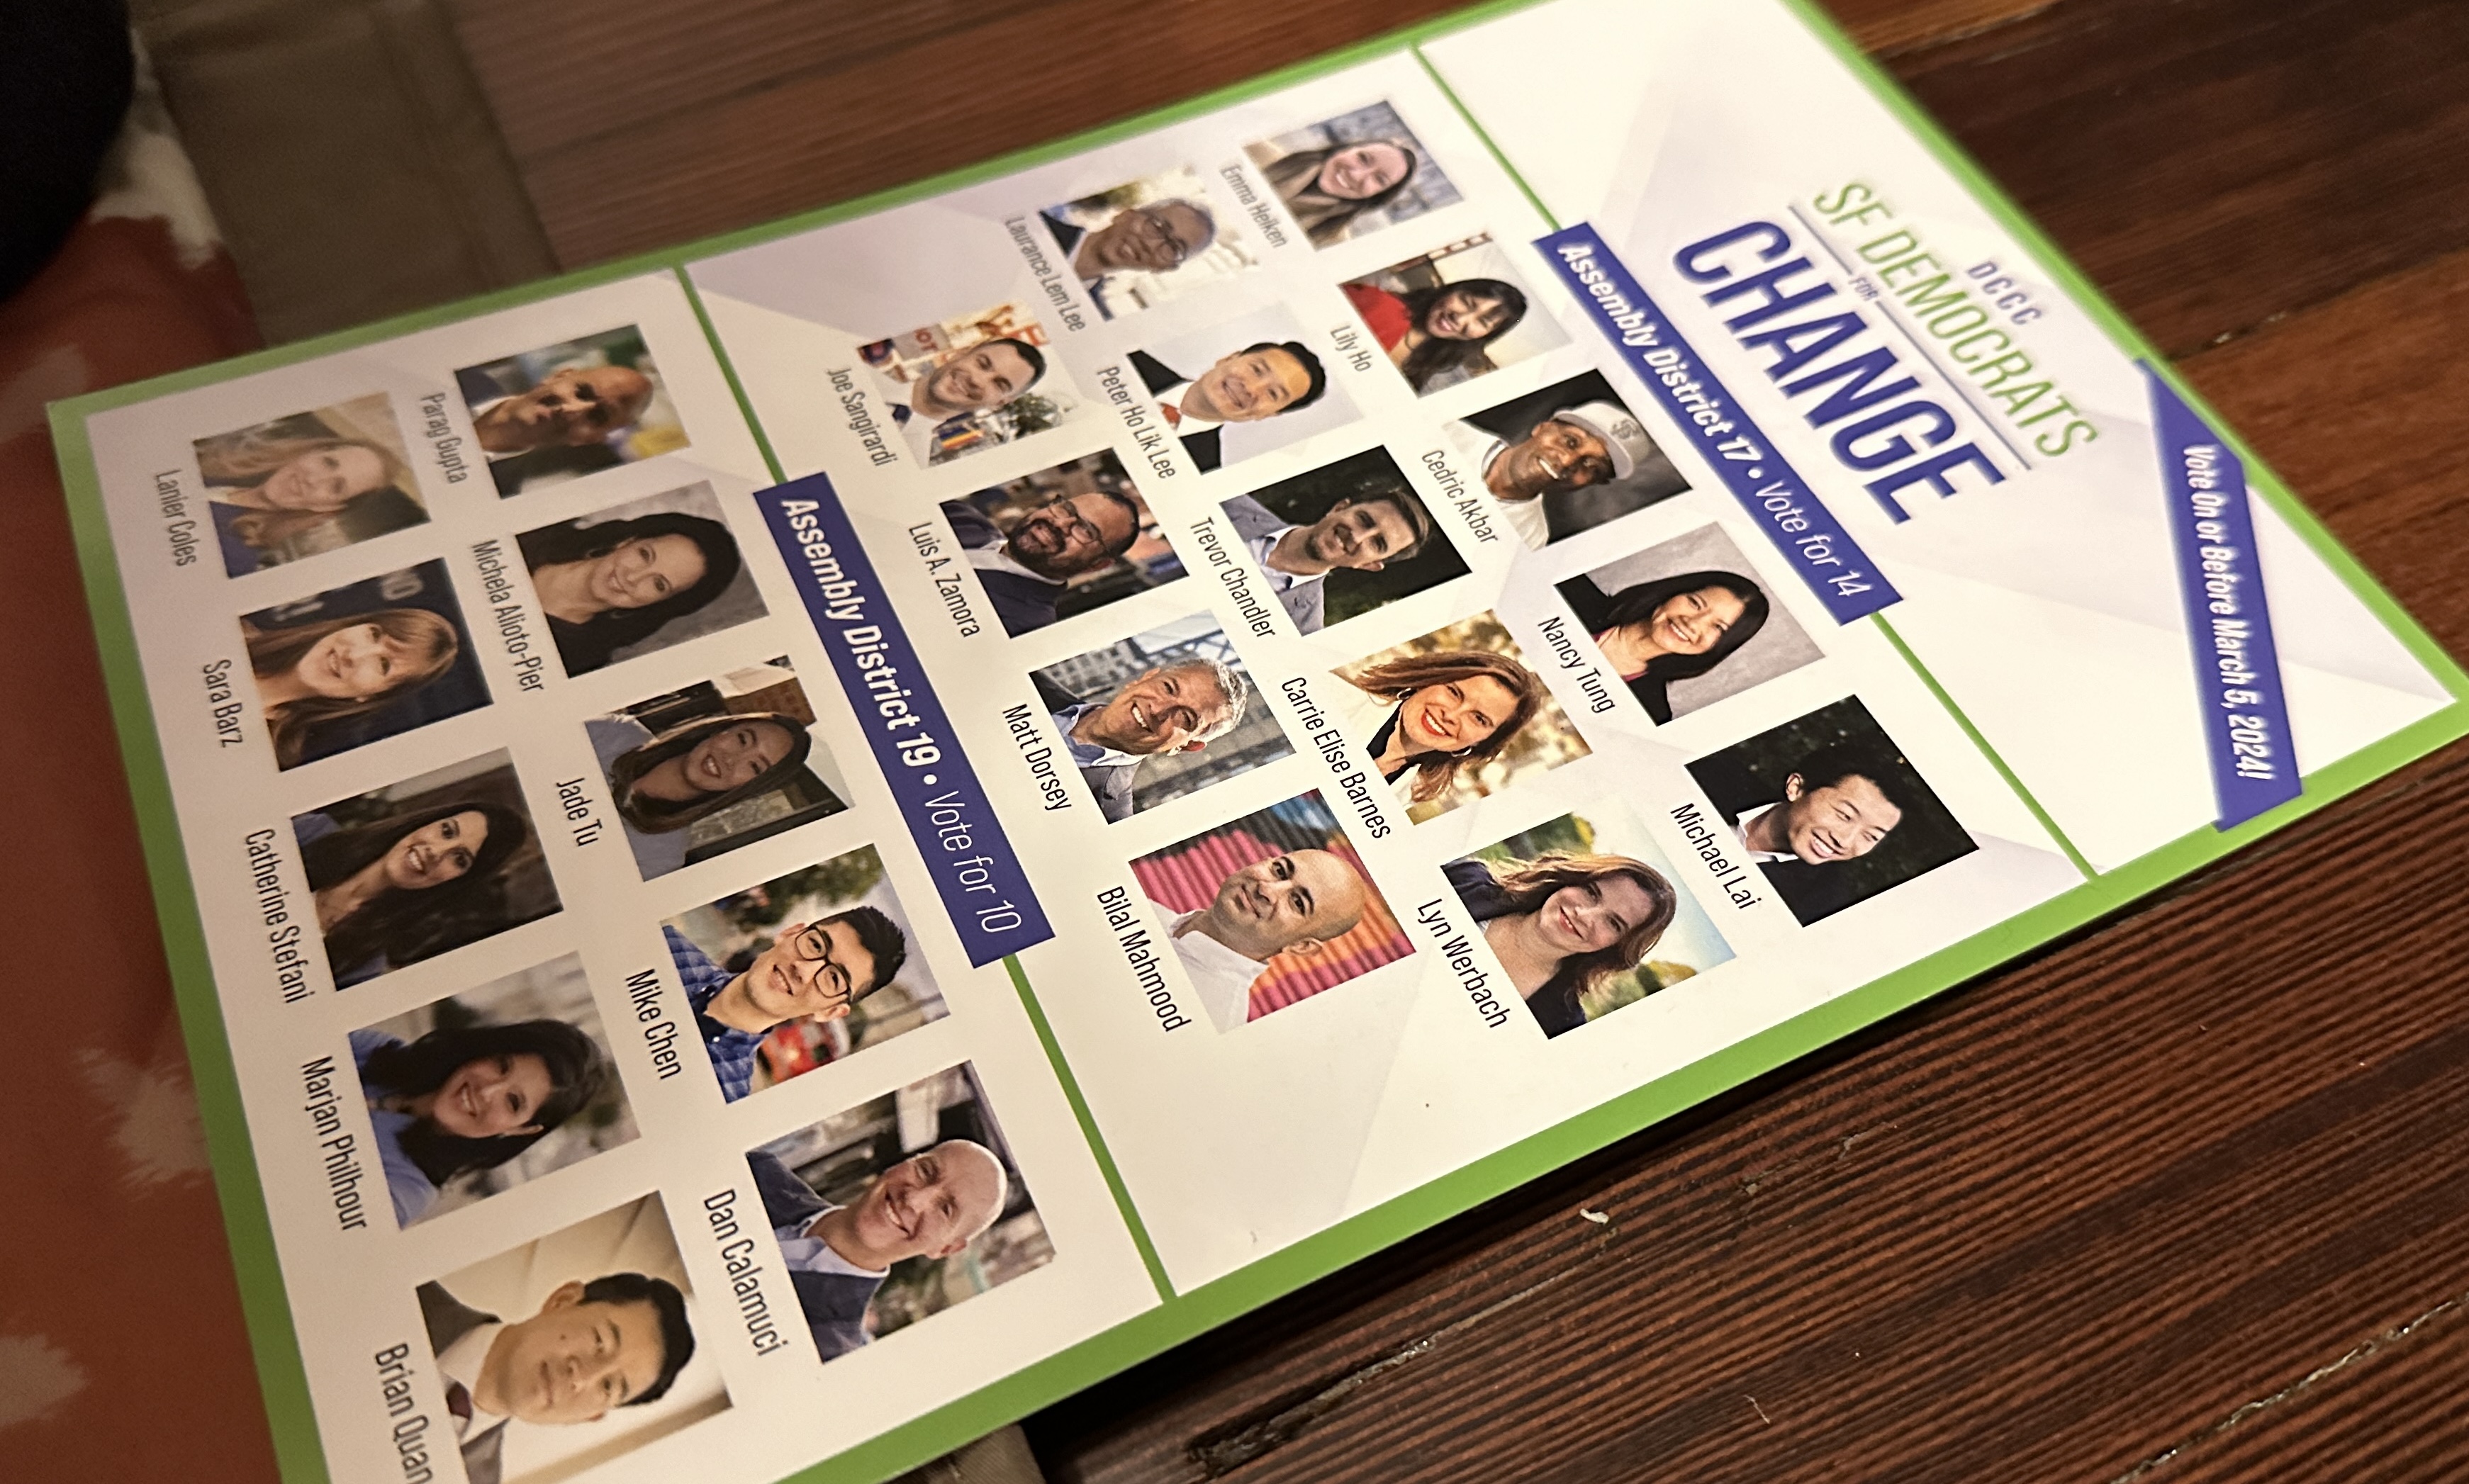 The image shows a flier with headshot photos and names of individuals running on the SF Democrats for Change slate for the Democratic County Central Committee.